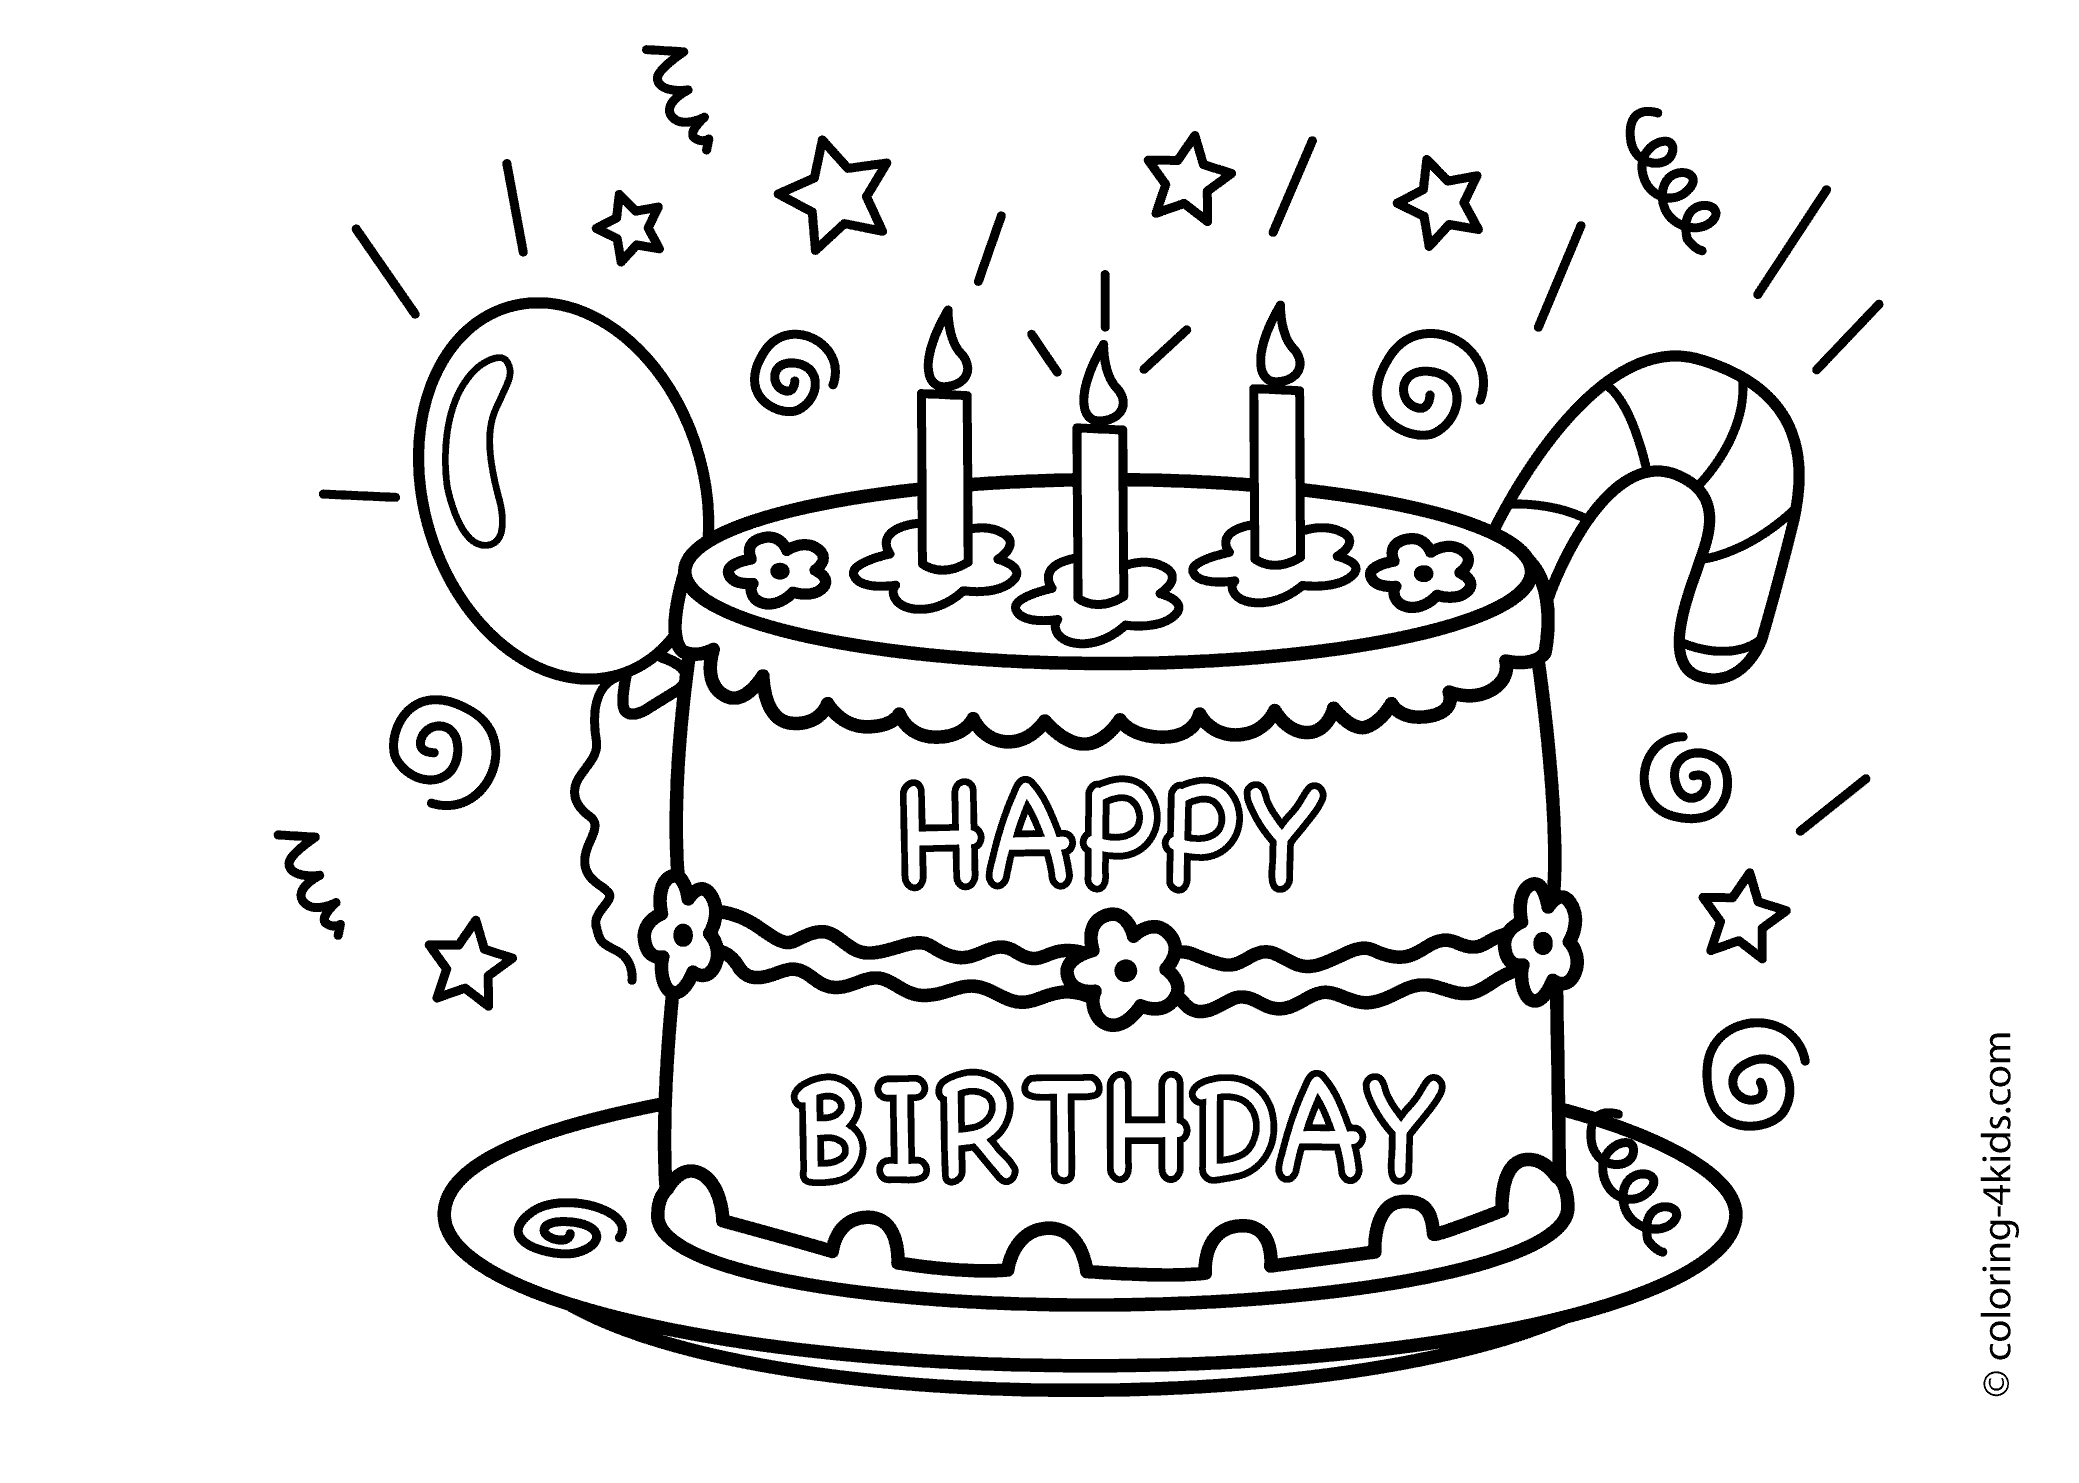 Free Coloring Pages Of Birthday Cakes - High Quality Coloring Pages